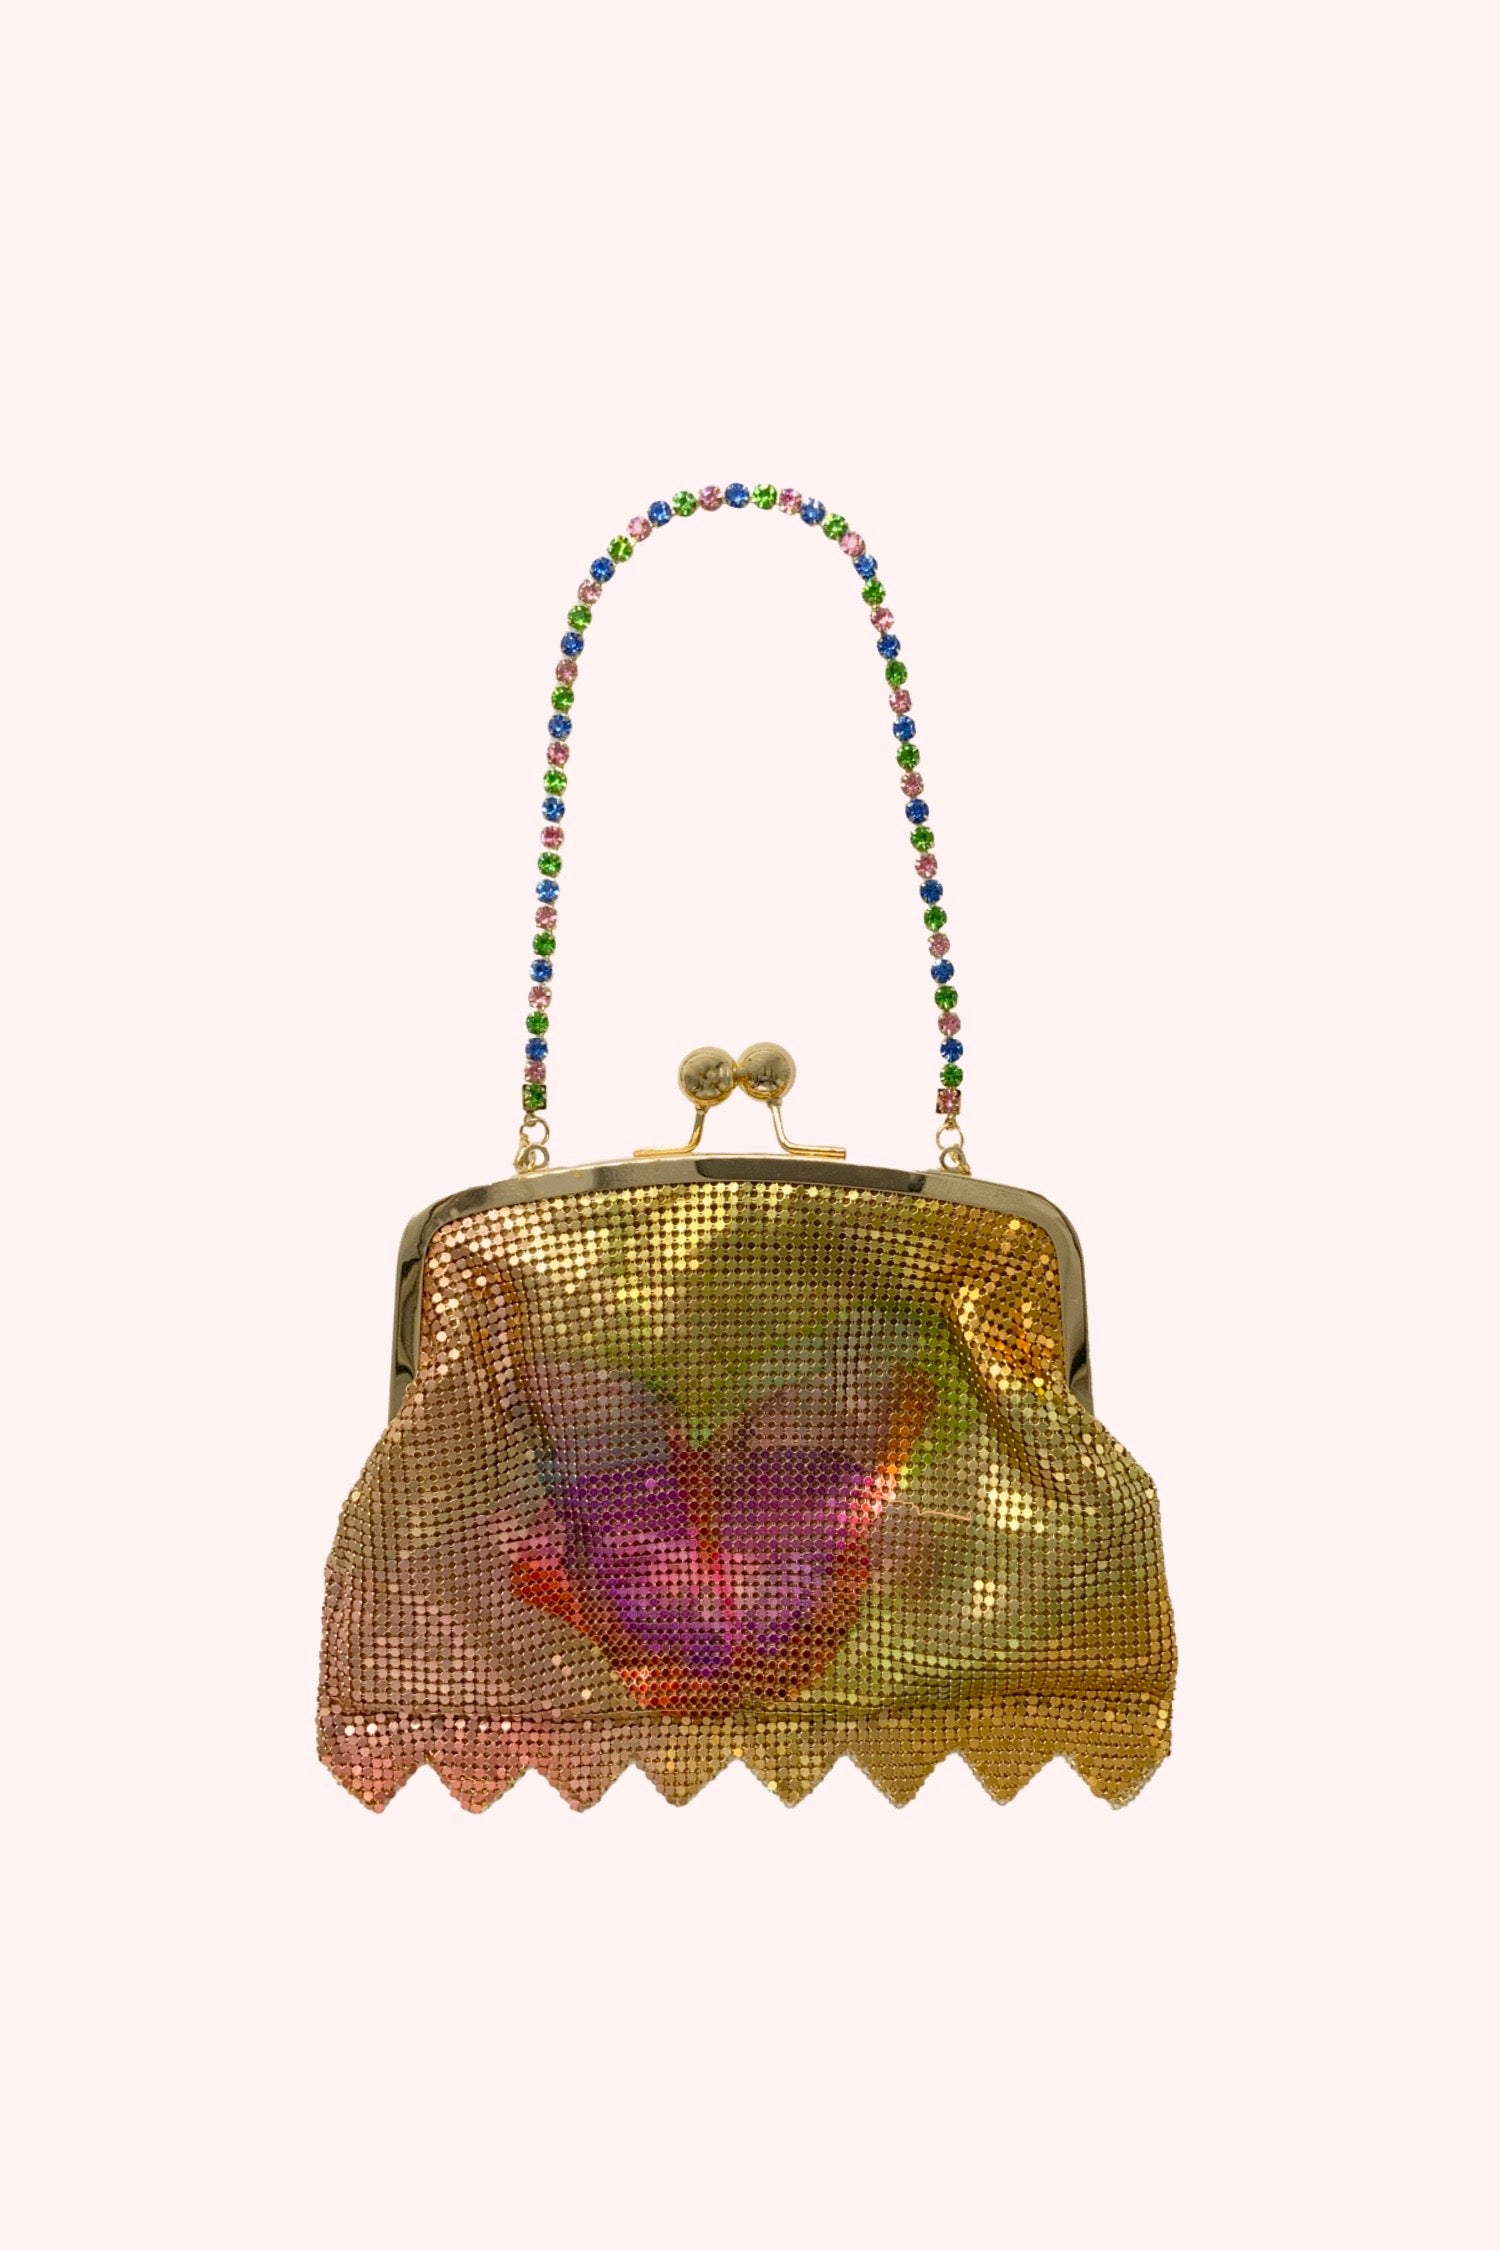 Impressionism Butterfly Chainmail Purse Gold